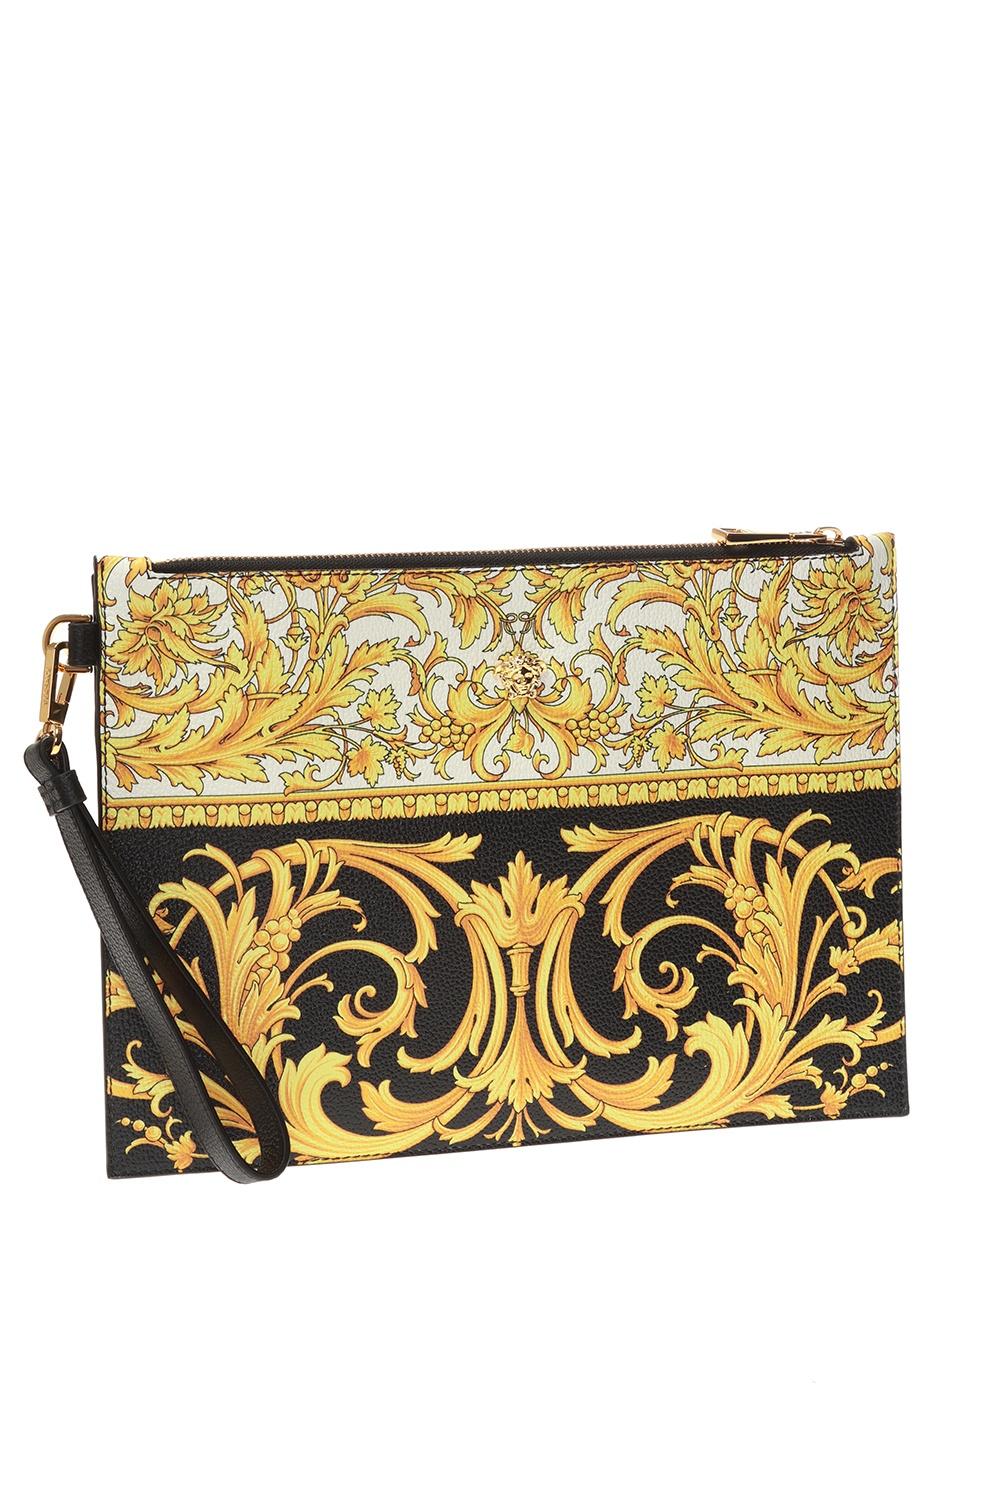 Versace Mens Barocco Print Leather Zipper Pouch with Detachable Wrist Strap

Go bold in baroque. Crafted in leather, this black, white and gold-tone baroque print clutch / pouch from Versace sports a sleek, streamlined design. Finished with a